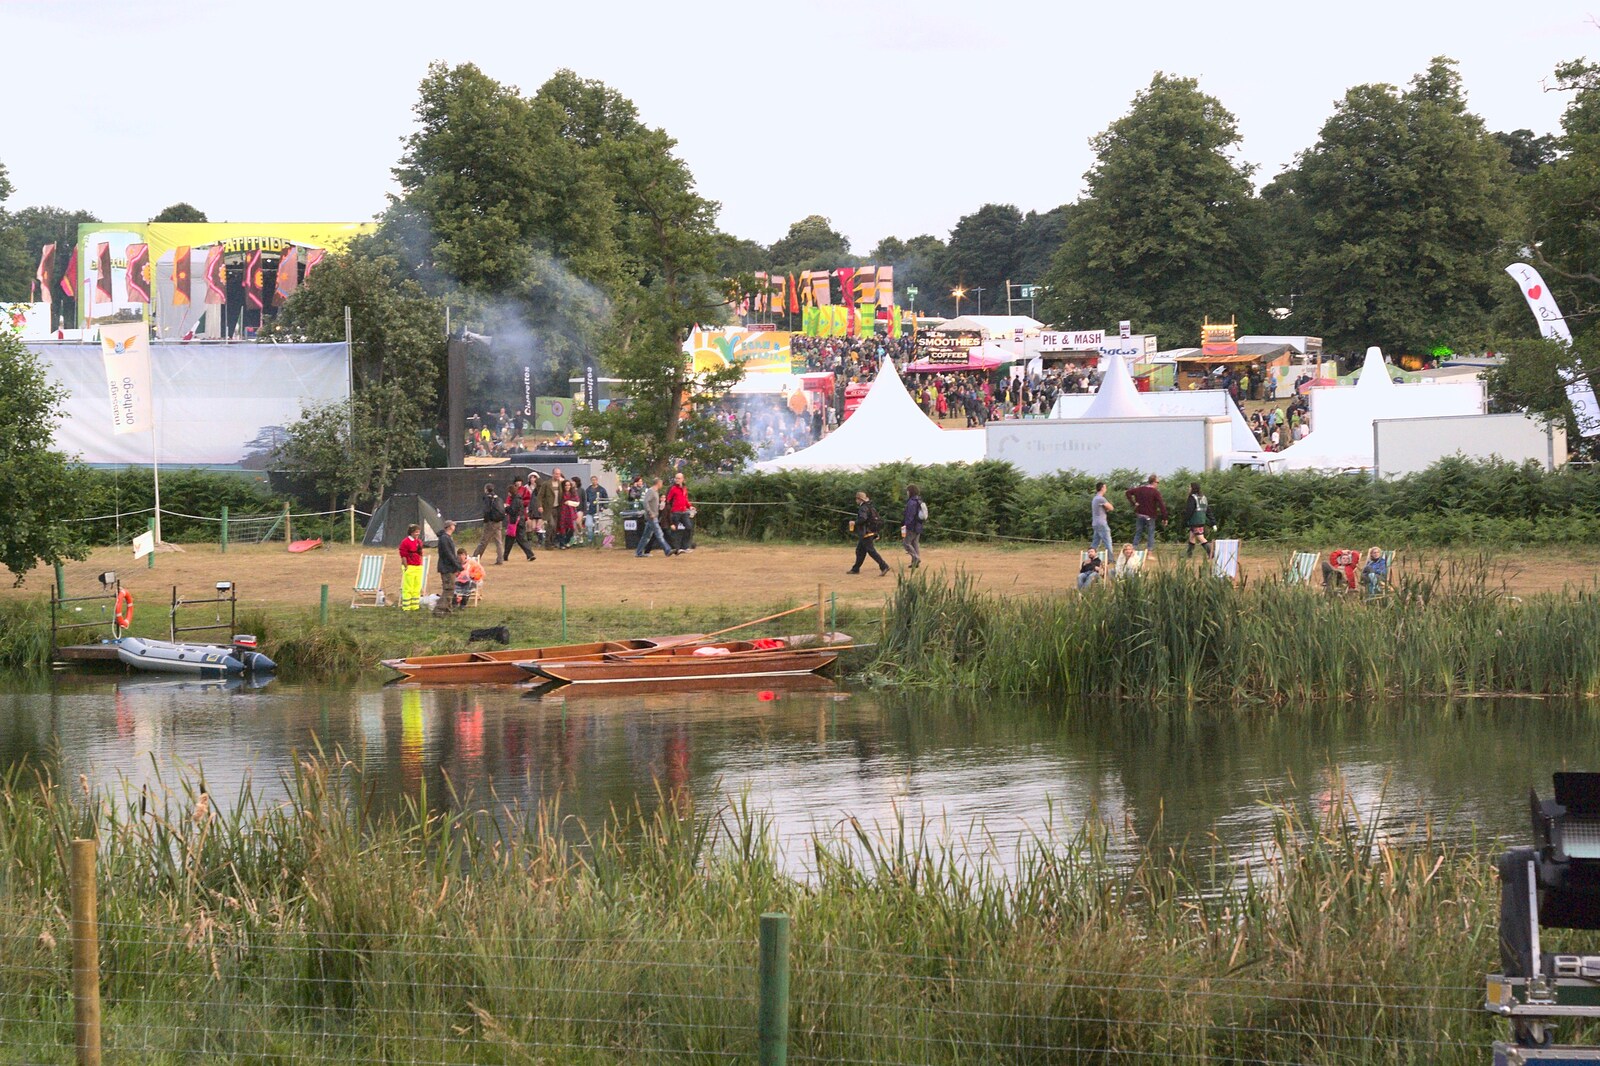 A view over the lake from The Latitude Festival, Henham Park, Suffolk - 20th July 2009